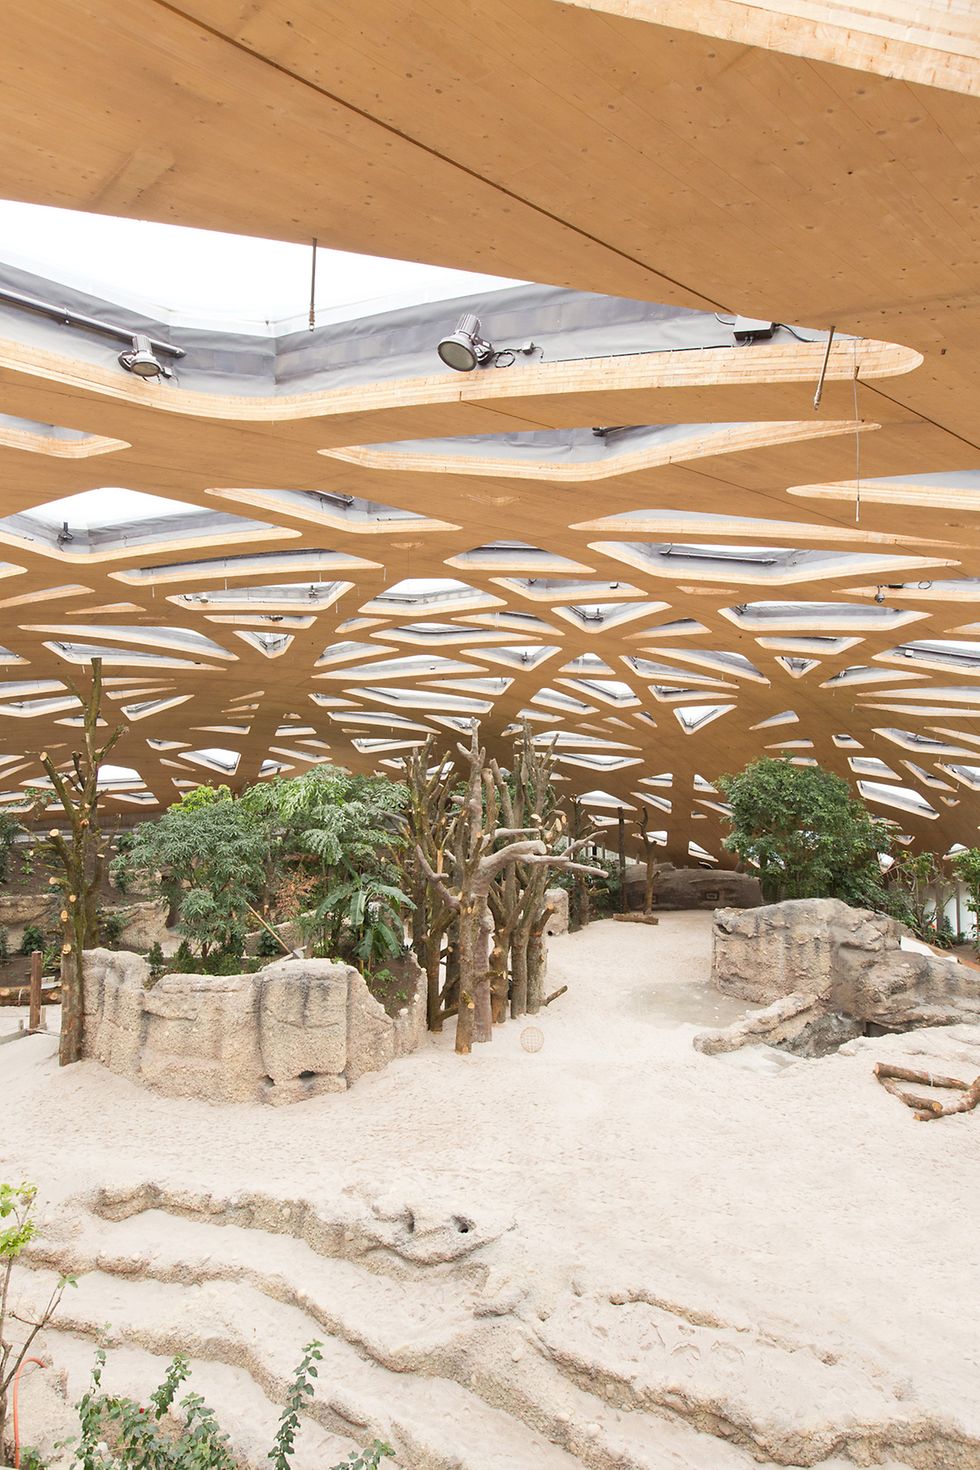 The canopy-like freestanding domed roof of the elephant house at Zurich Zoo in Switzerland